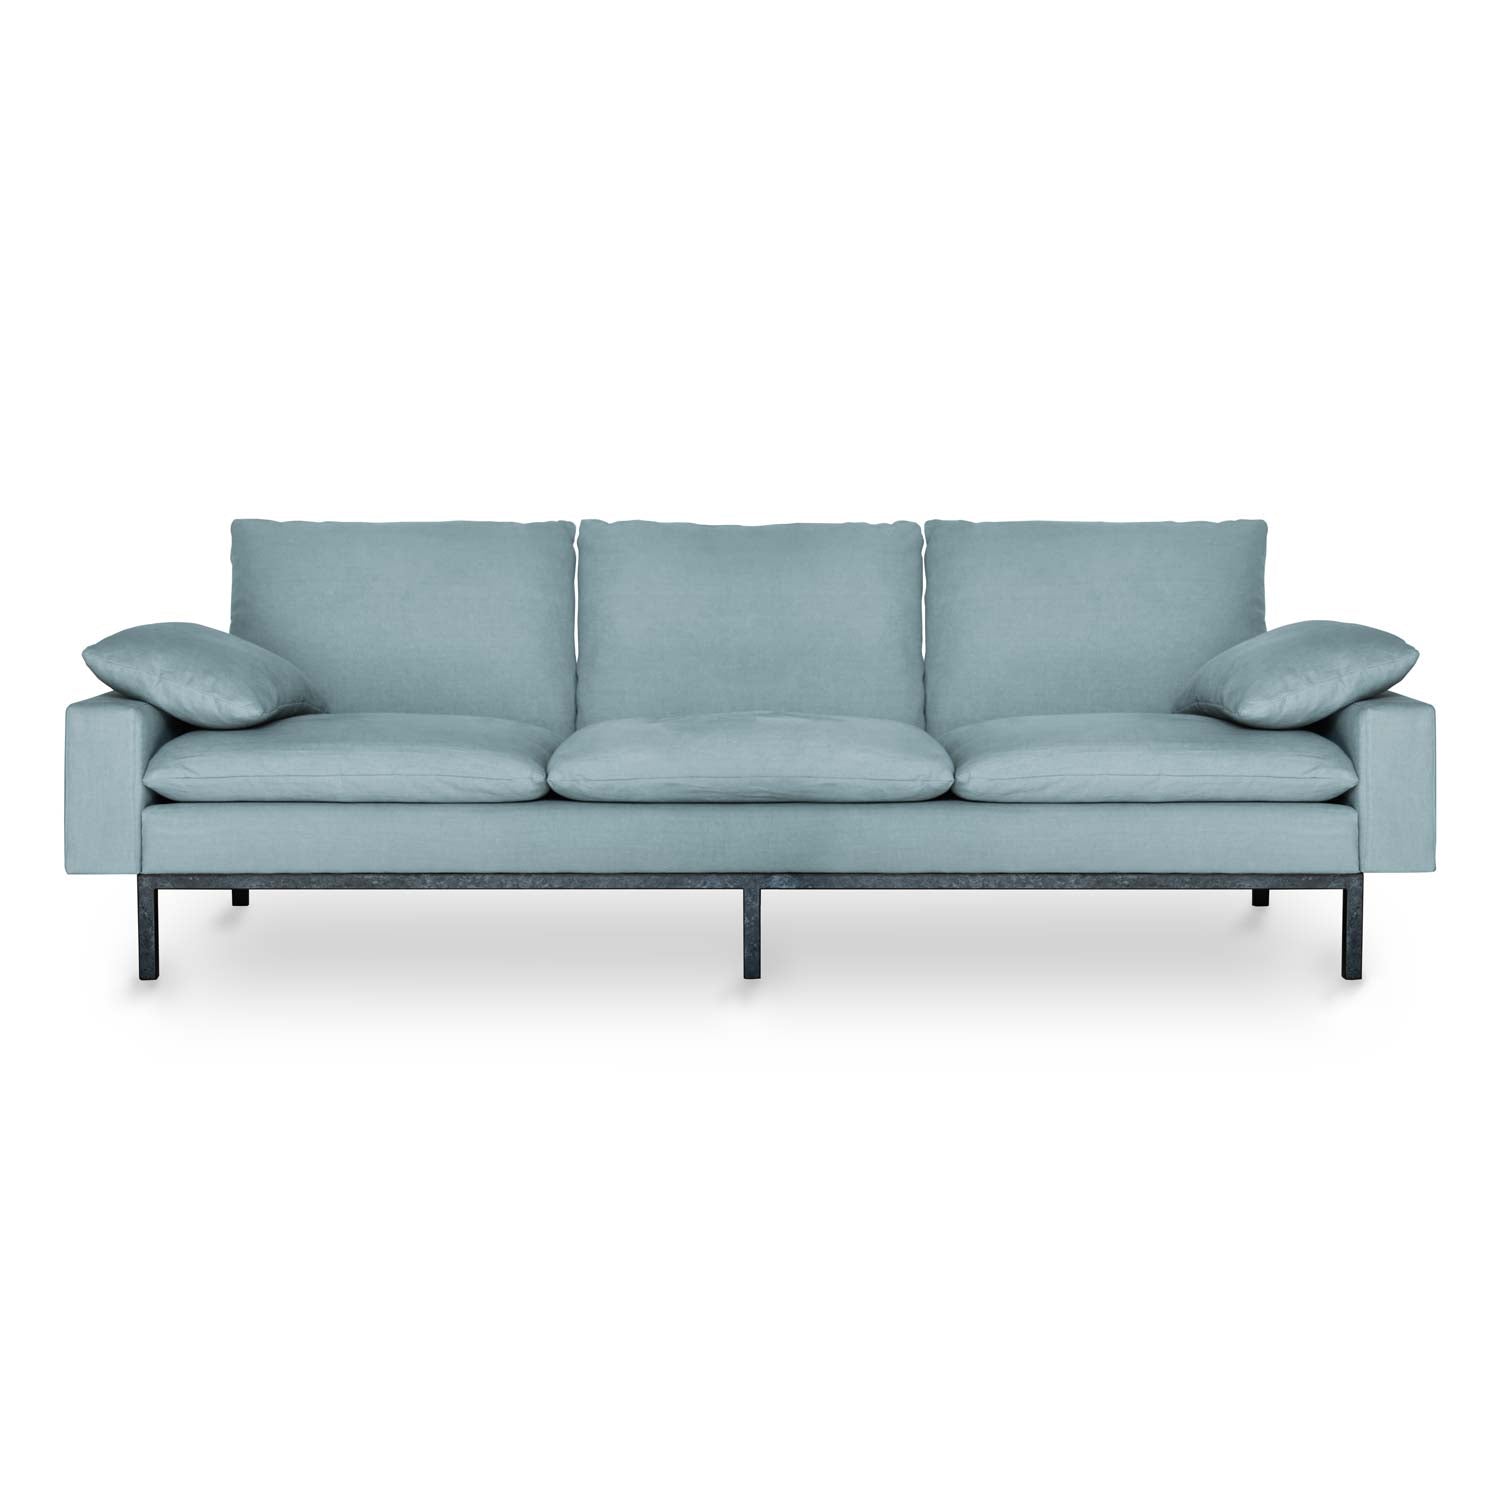 Create Your Oasis of Relaxation. green linen sofa.